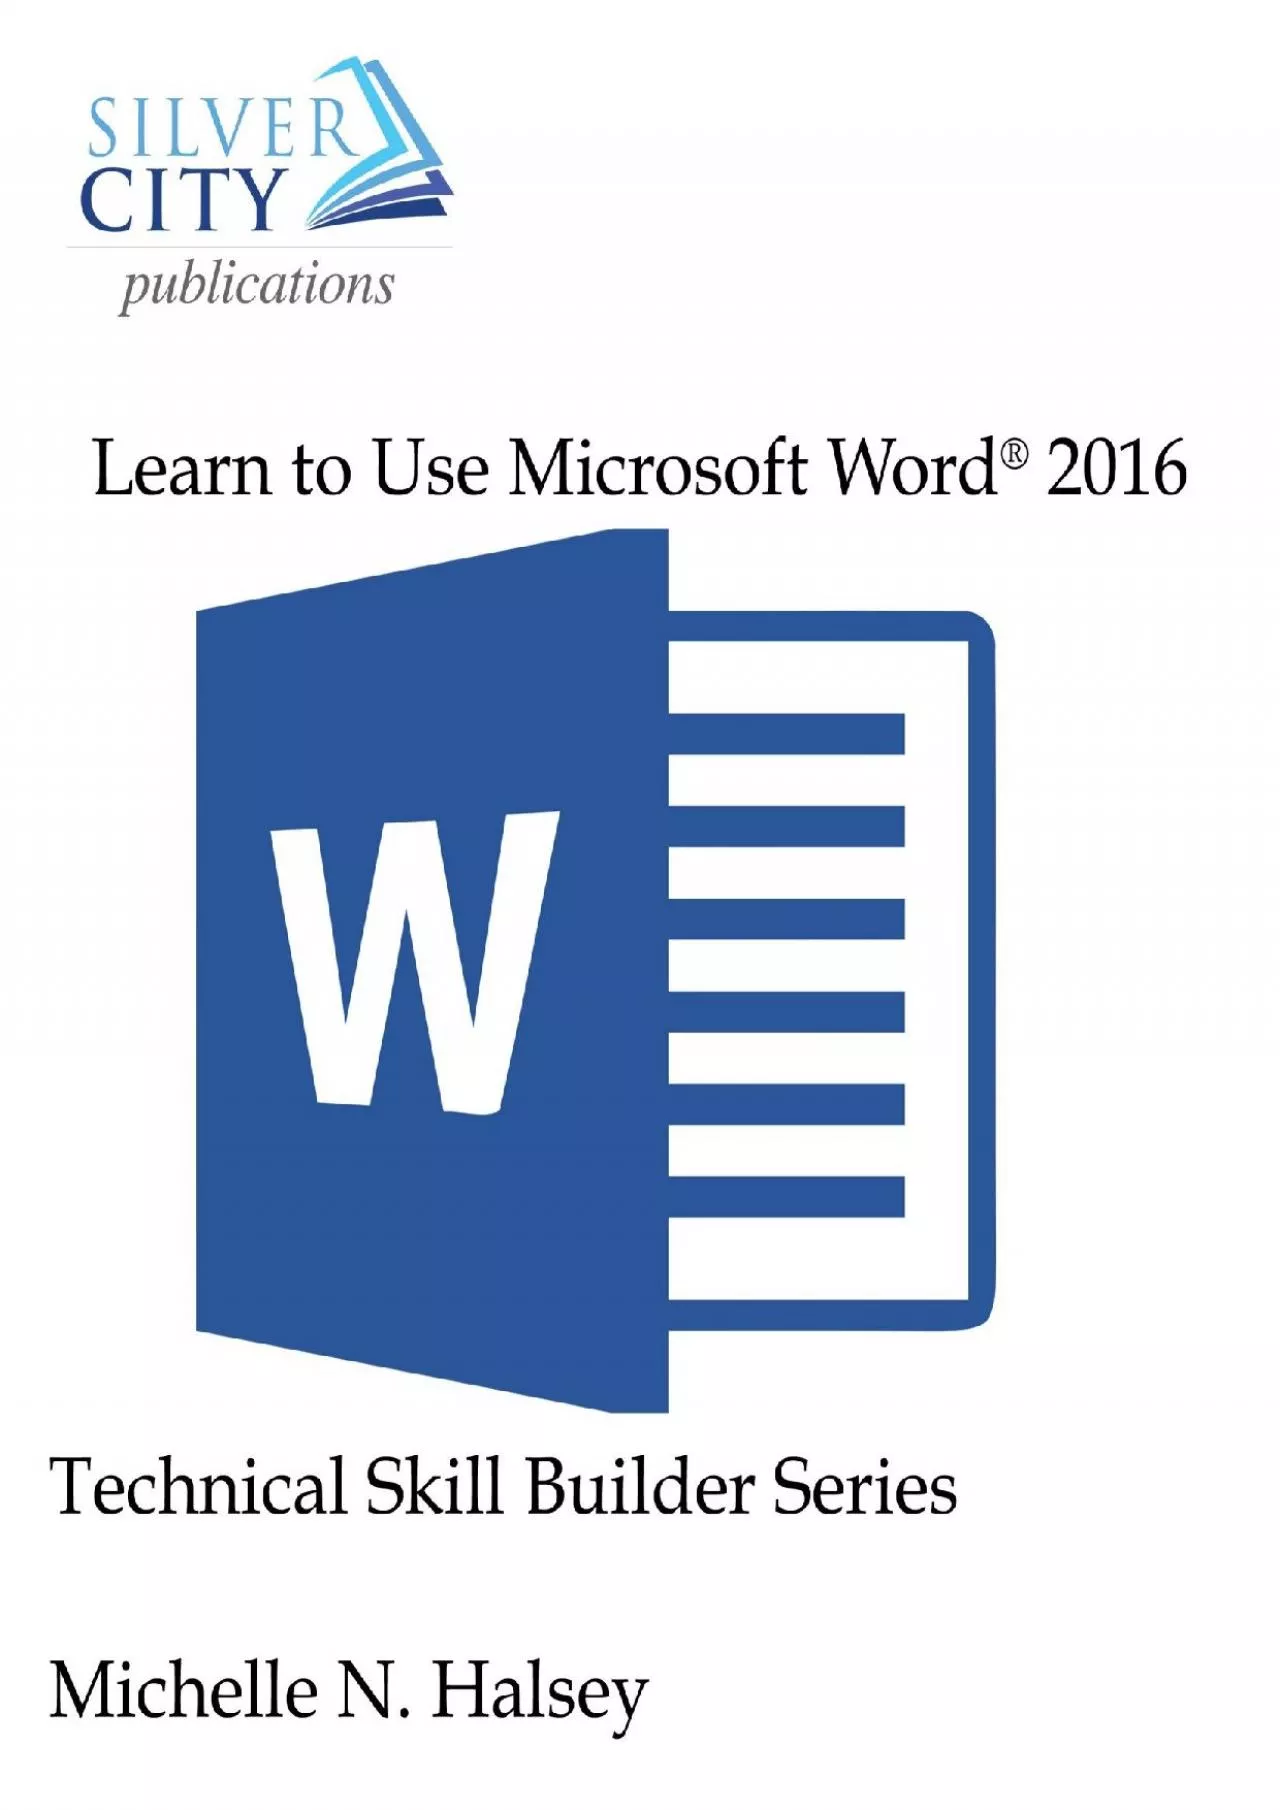 (BOOS)-Learn to Use Microsoft Word 2016 (Technical Skill Builder Series)